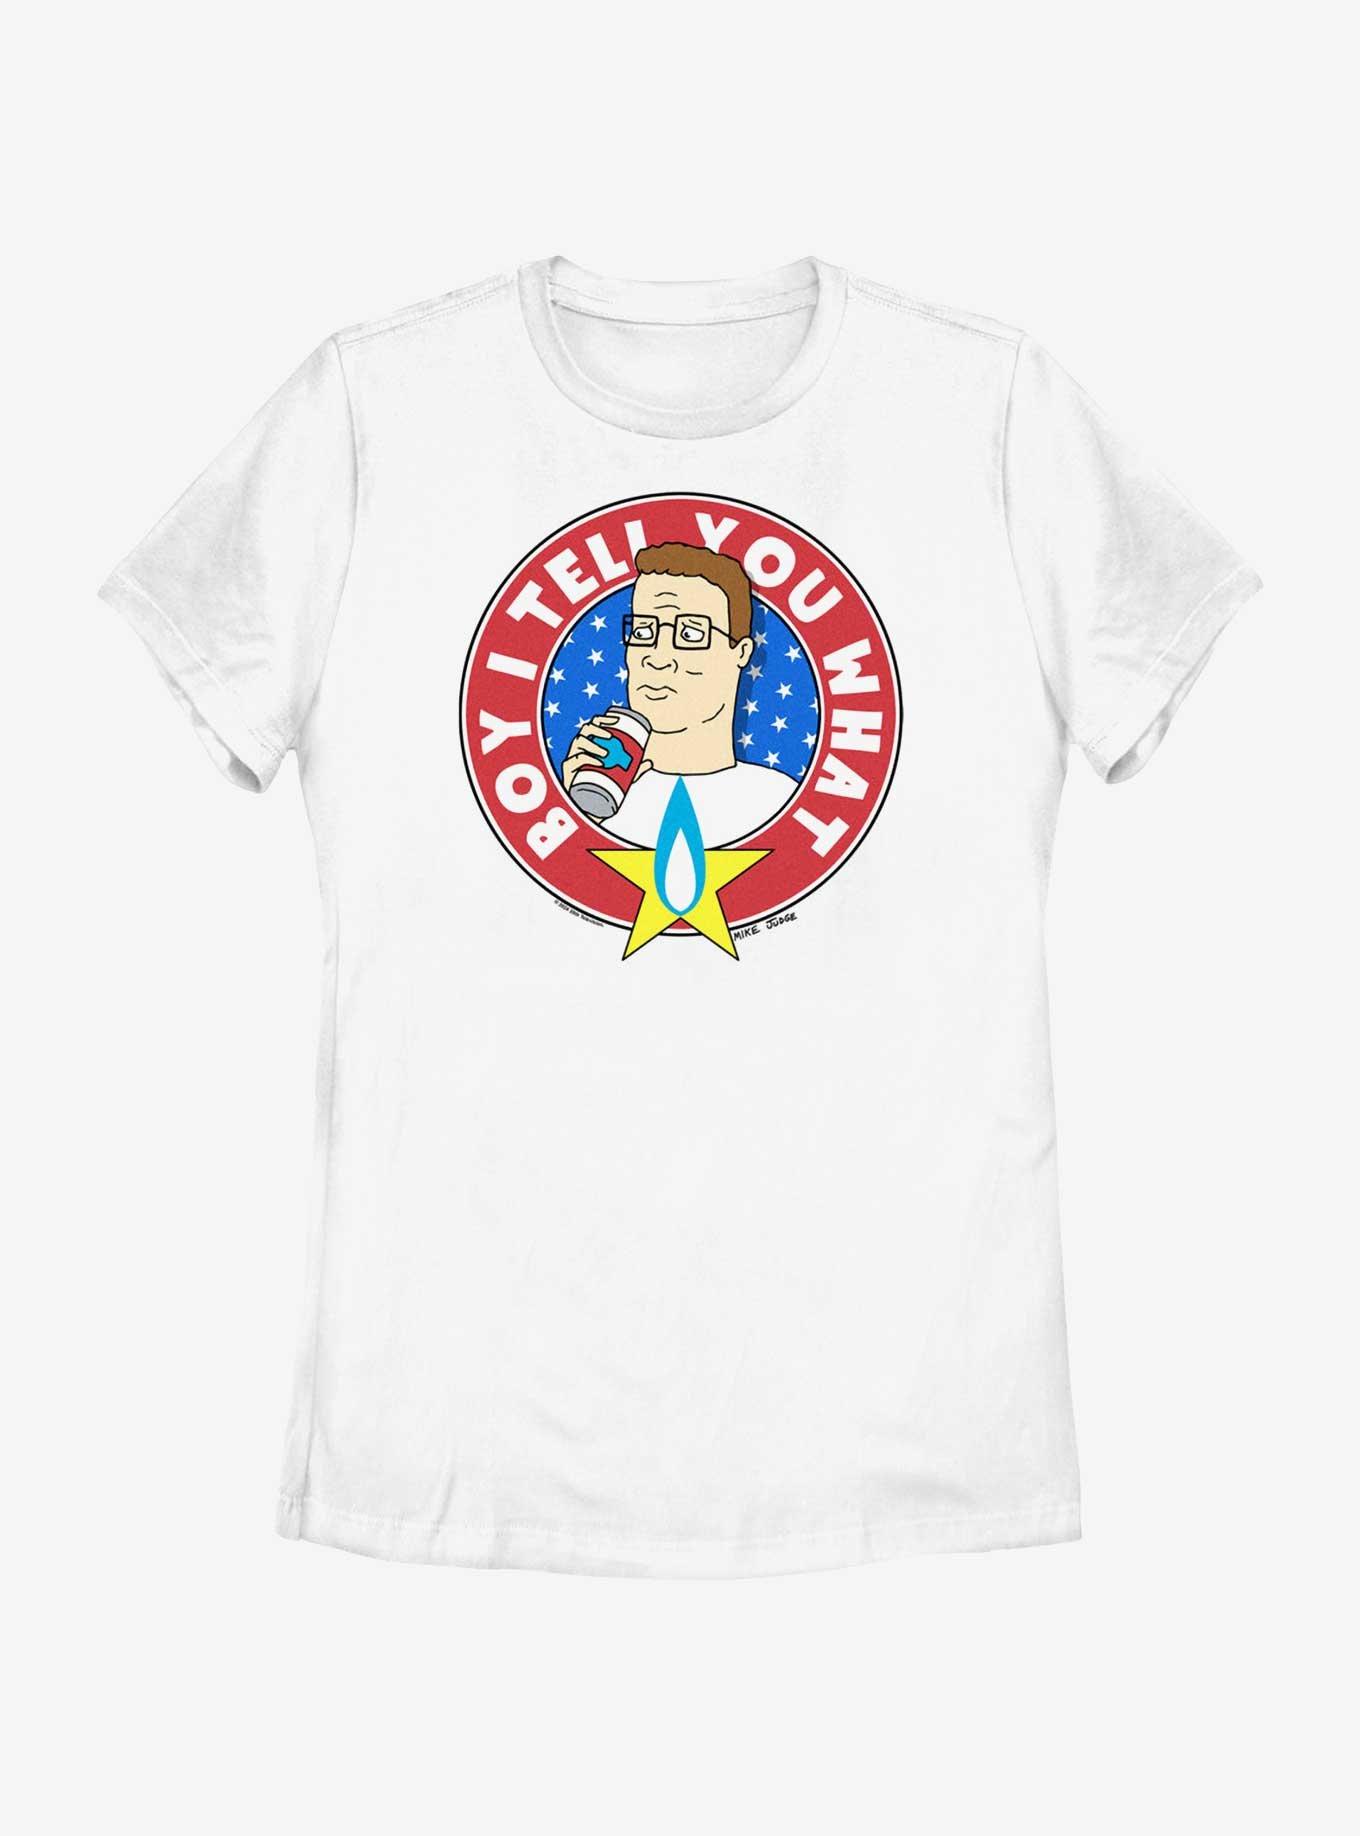 King of the Hill Boy I Tell You What Badge Women's T-Shirt, WHITE, hi-res